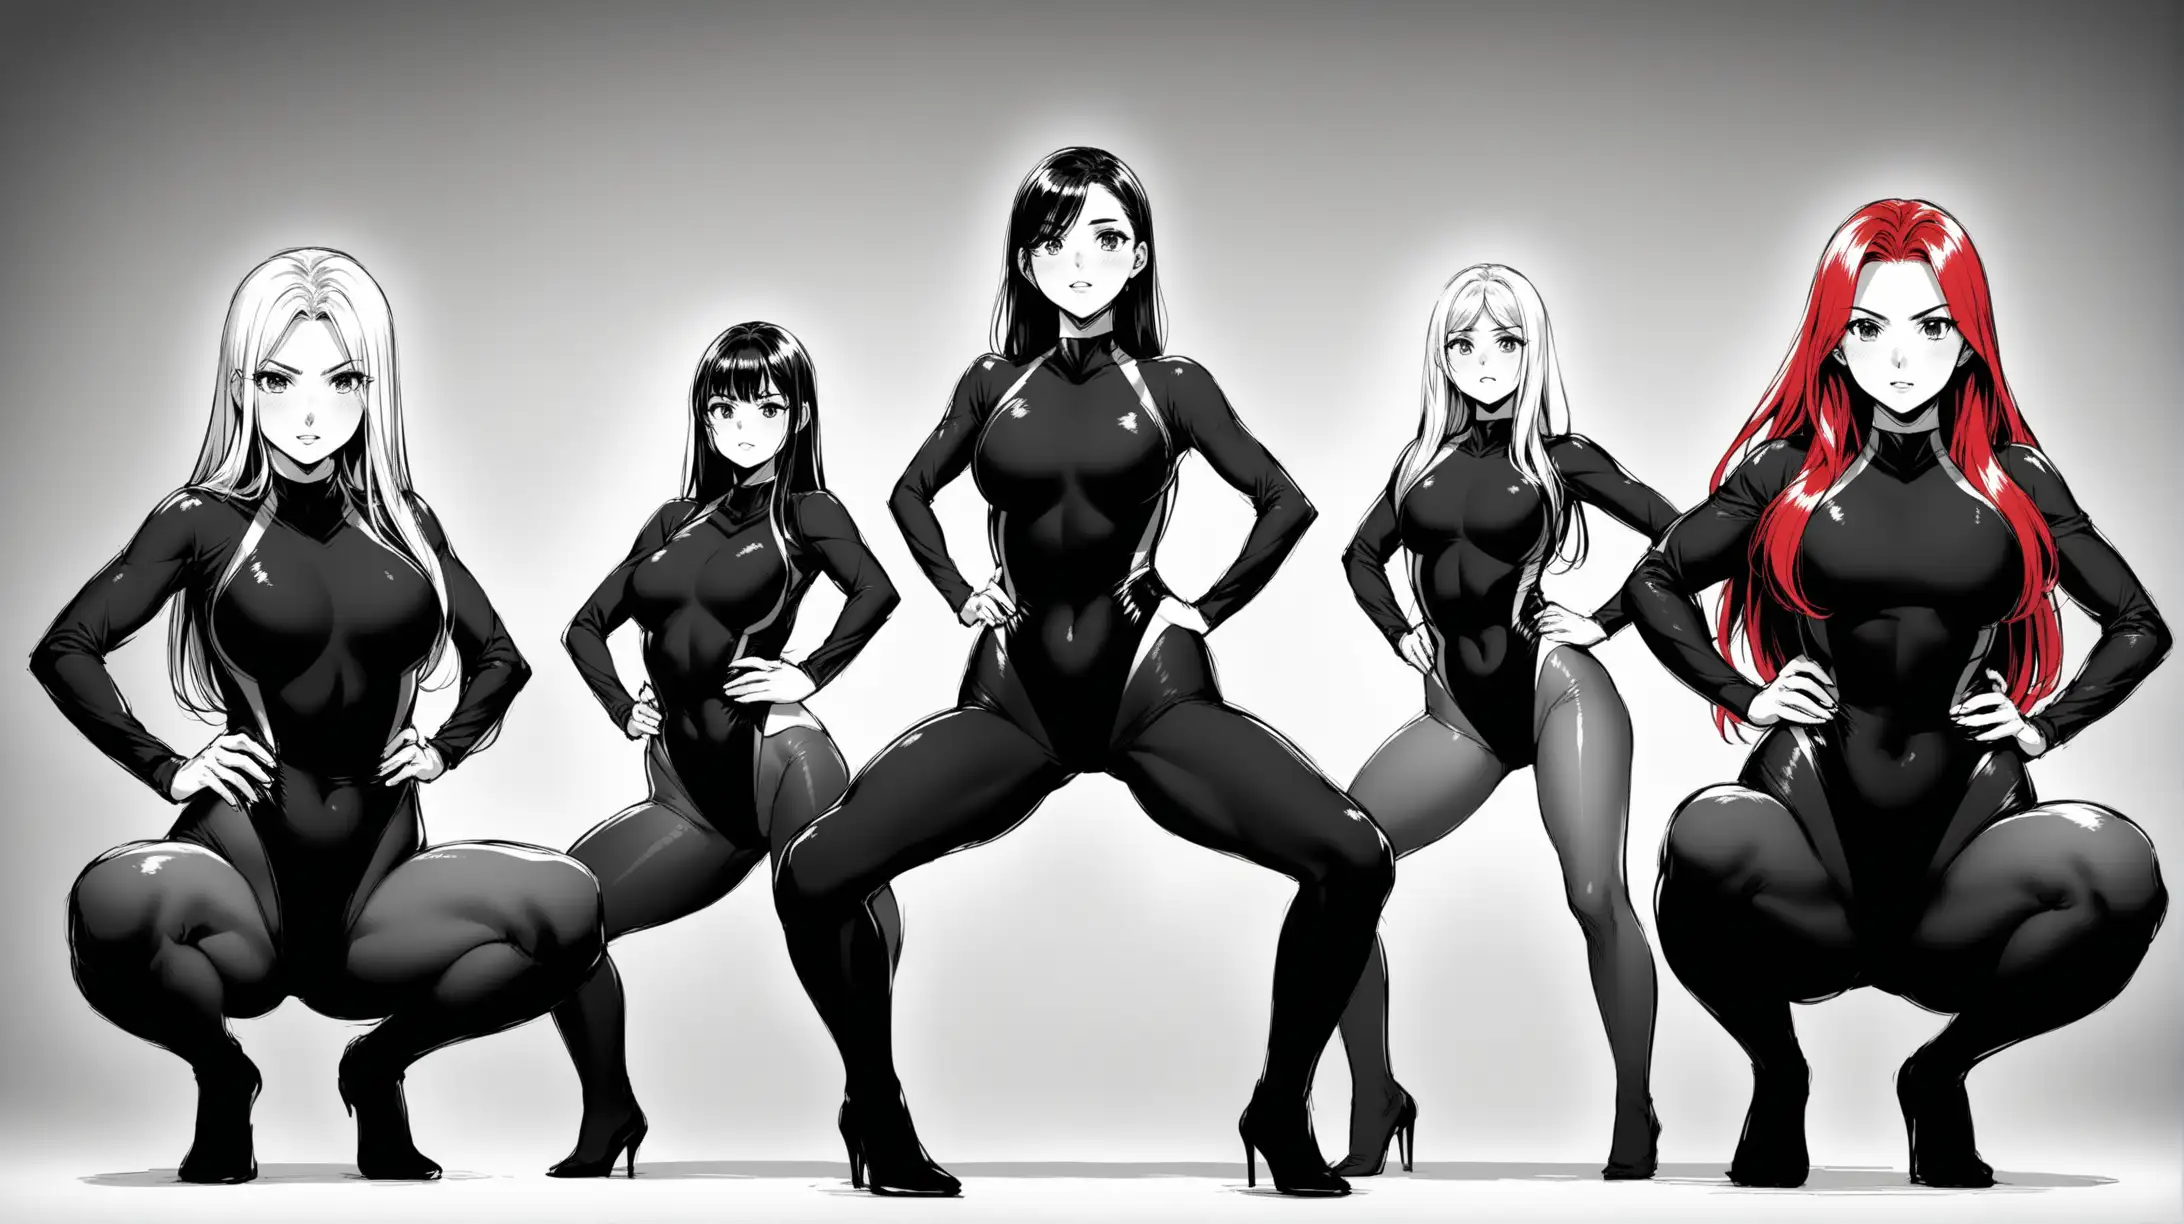 Diverse Group of Women in Black Leotards and Gray Tights Squatting Poses